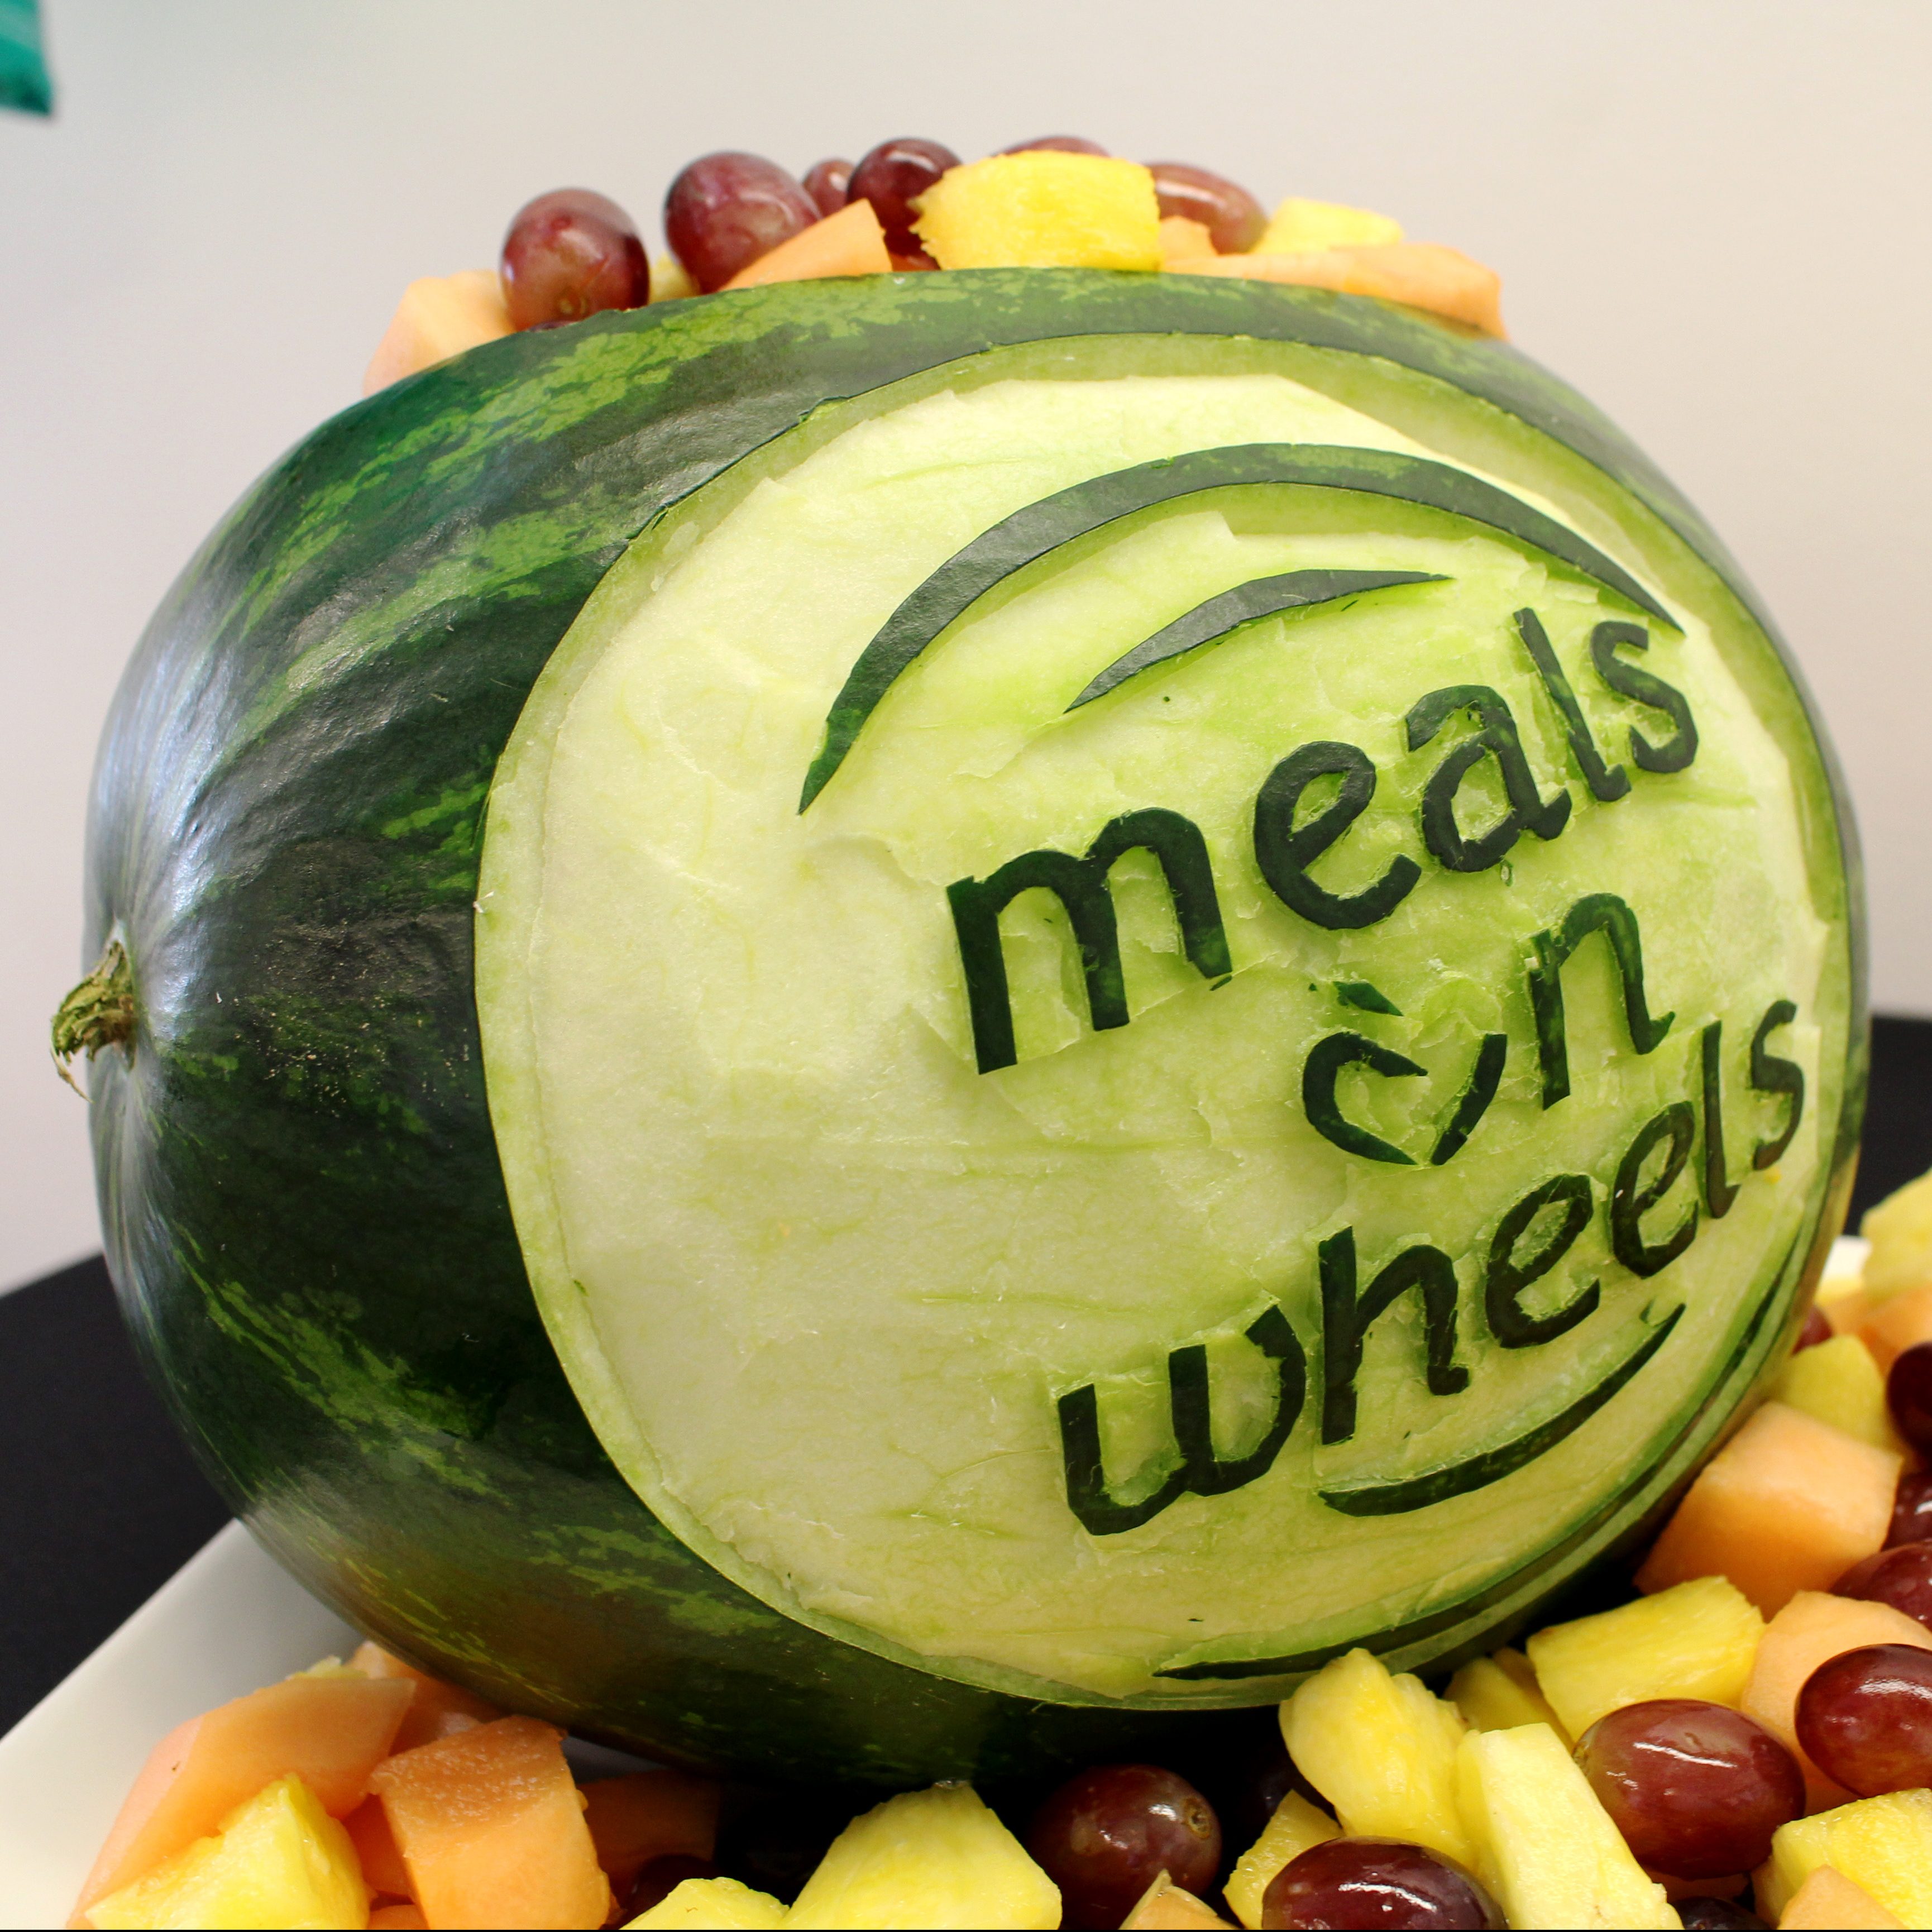 Chef Kris Almsted carved this watermelon with the Meals on Wheels logo for the Kitchen of Opportunities Grand Opening